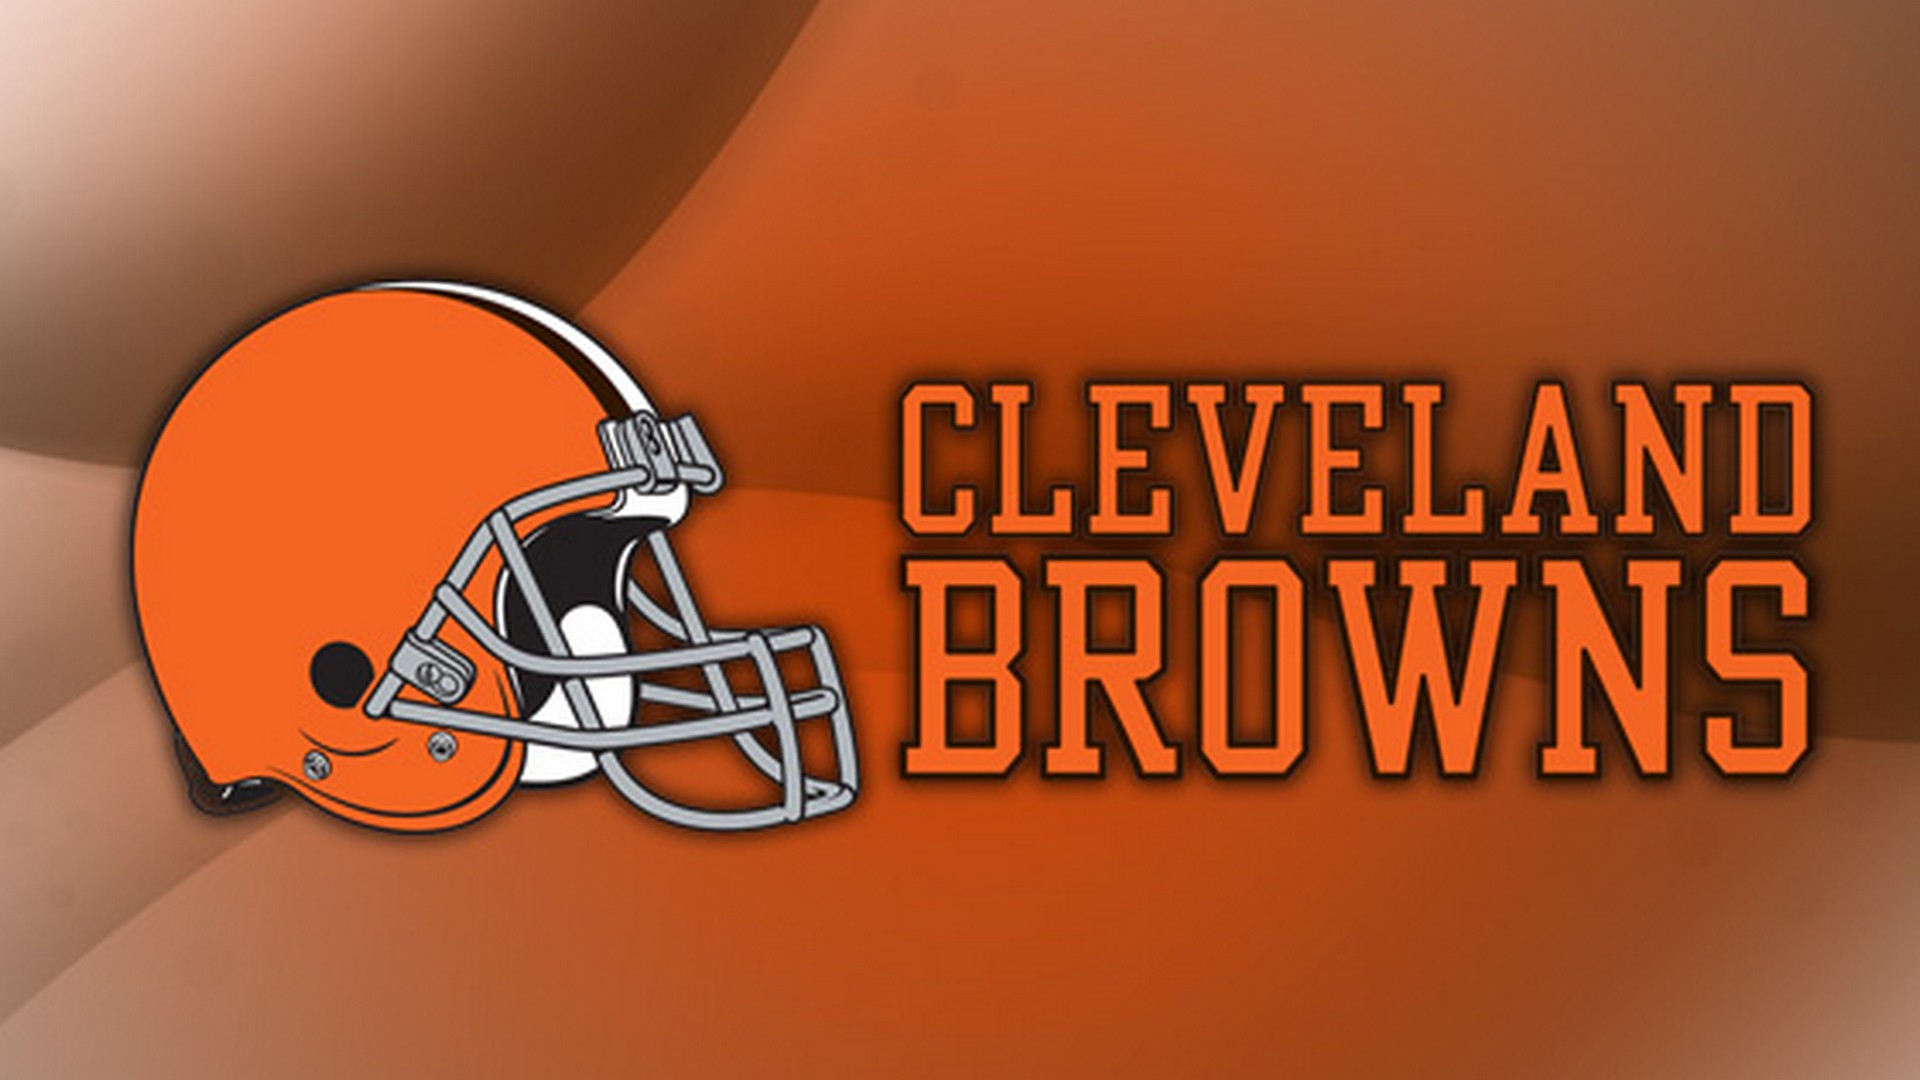 HD Backgrounds Cleveland Browns With Resolution 1920X1080